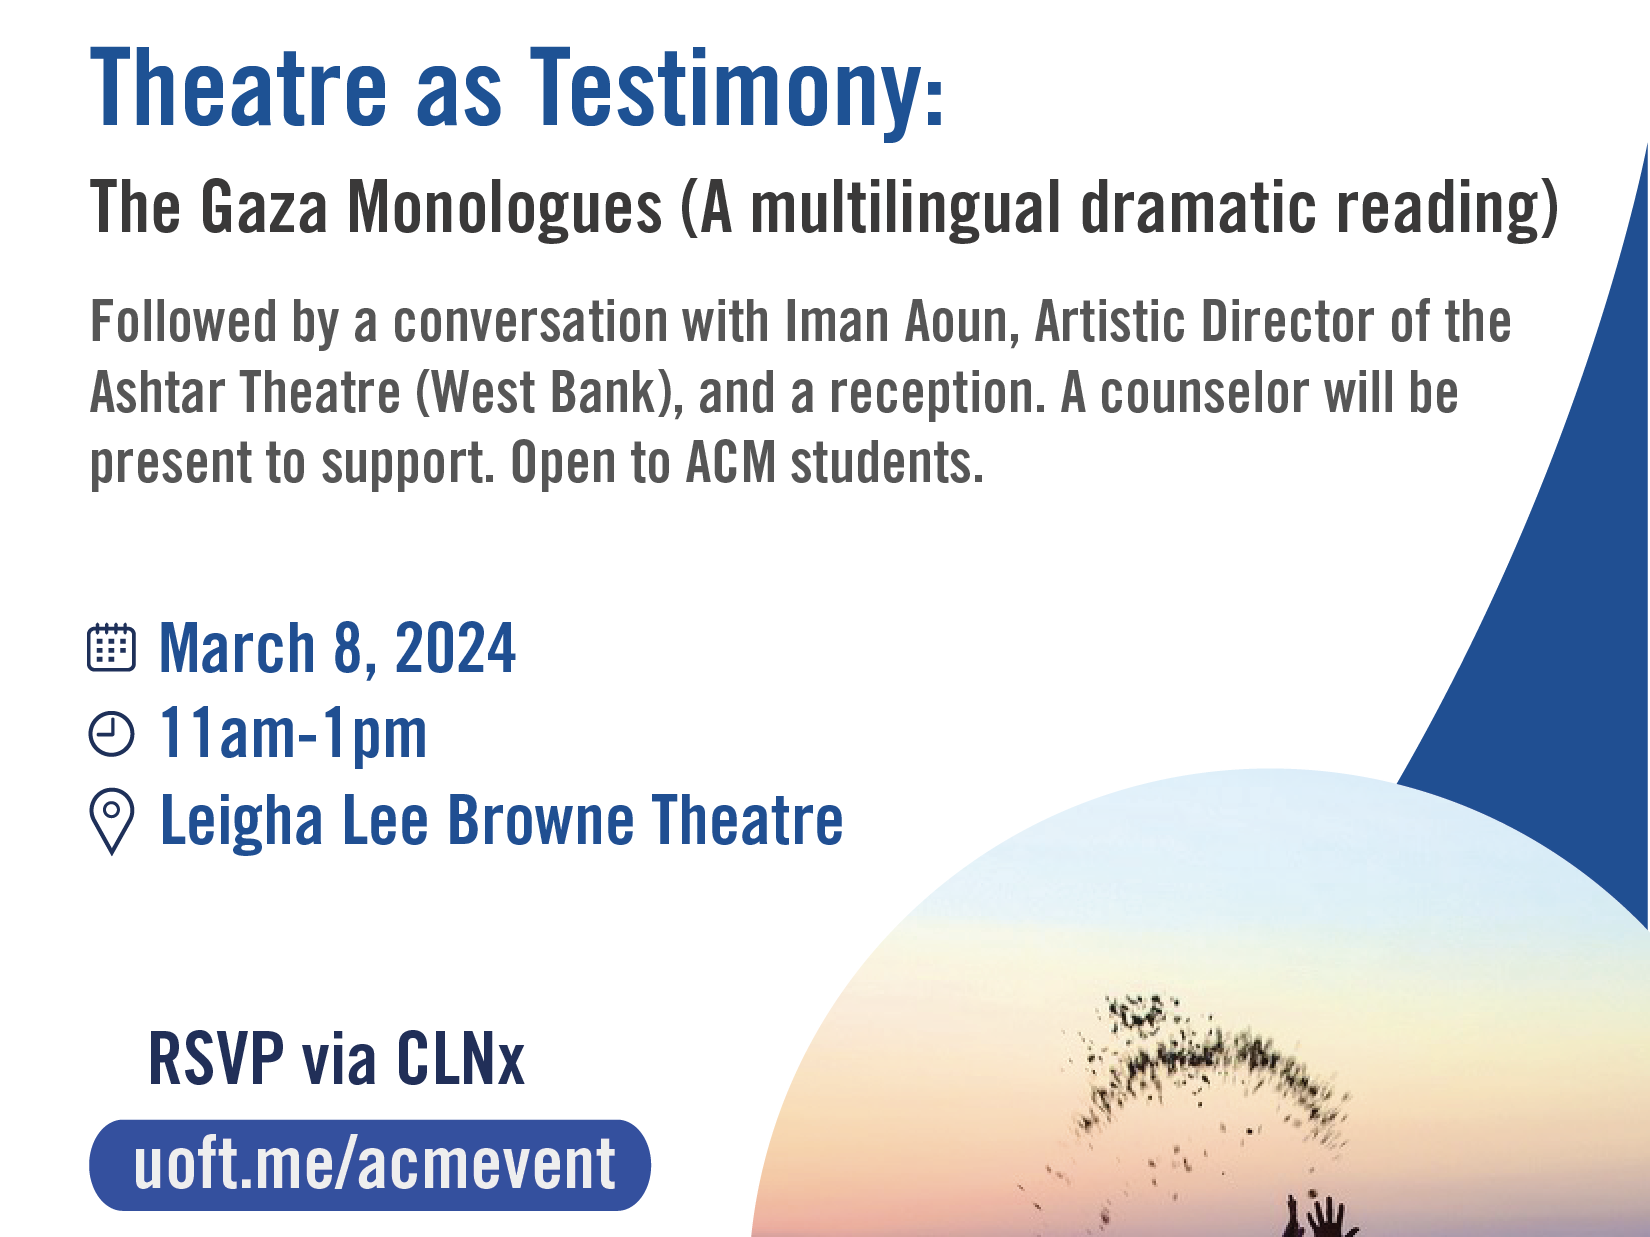 Poster for the event Theatre as Testimony, event detail listed on the webpage.